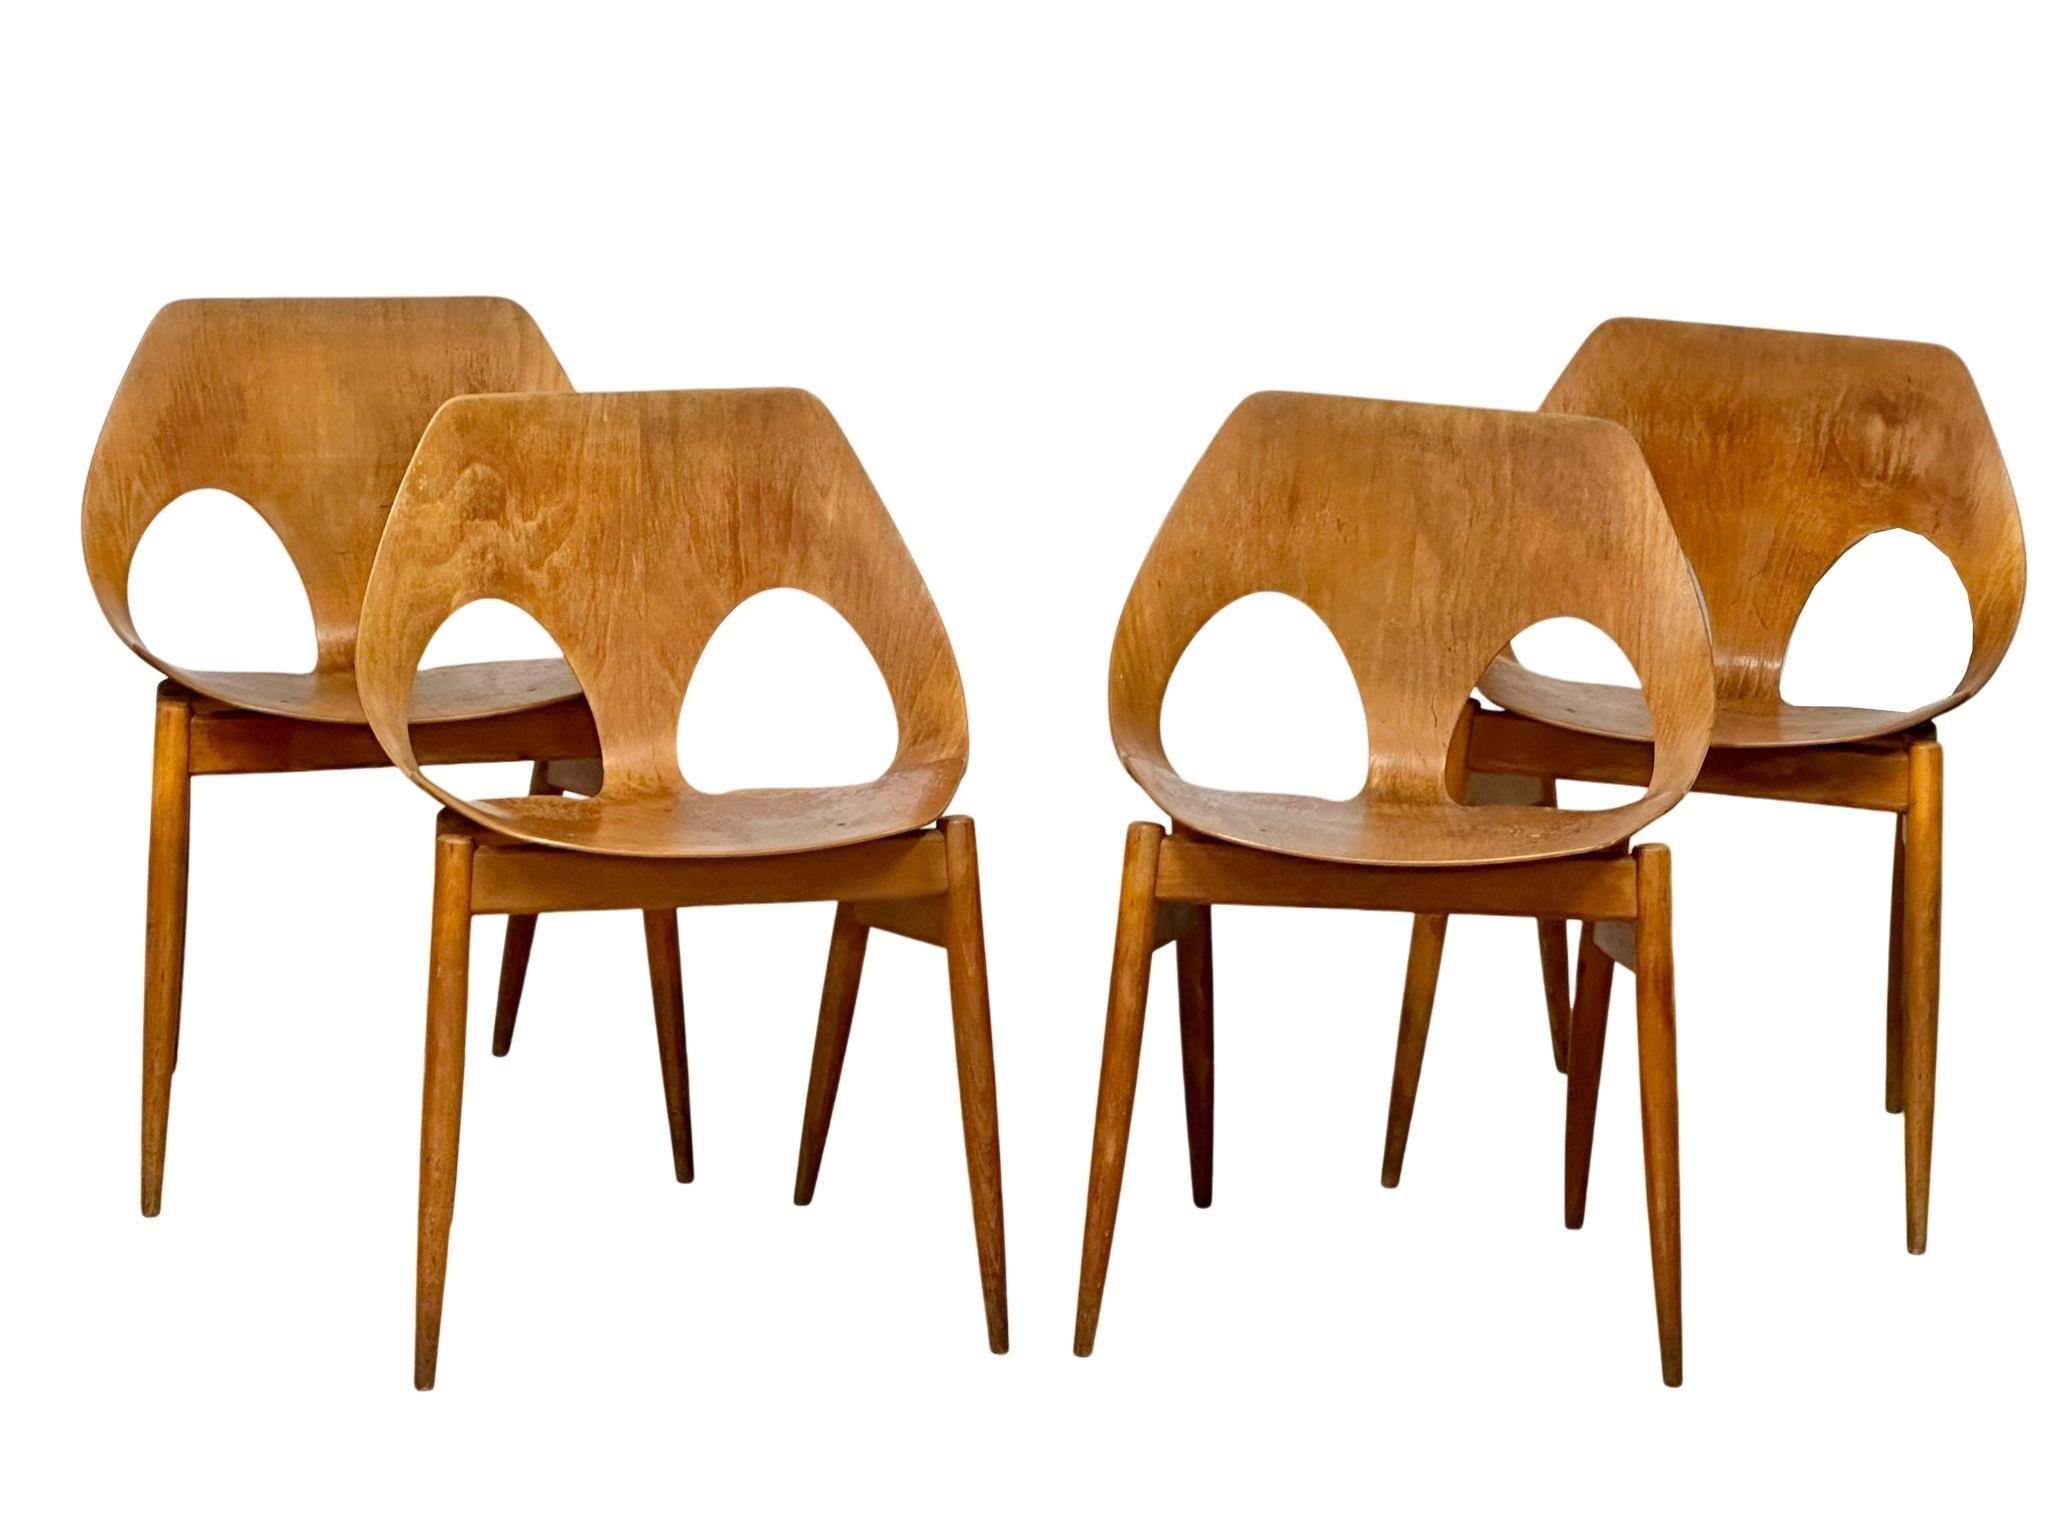 A rare set of 4 "Jason" chairs designed by Carl Jacobs for Kandya.